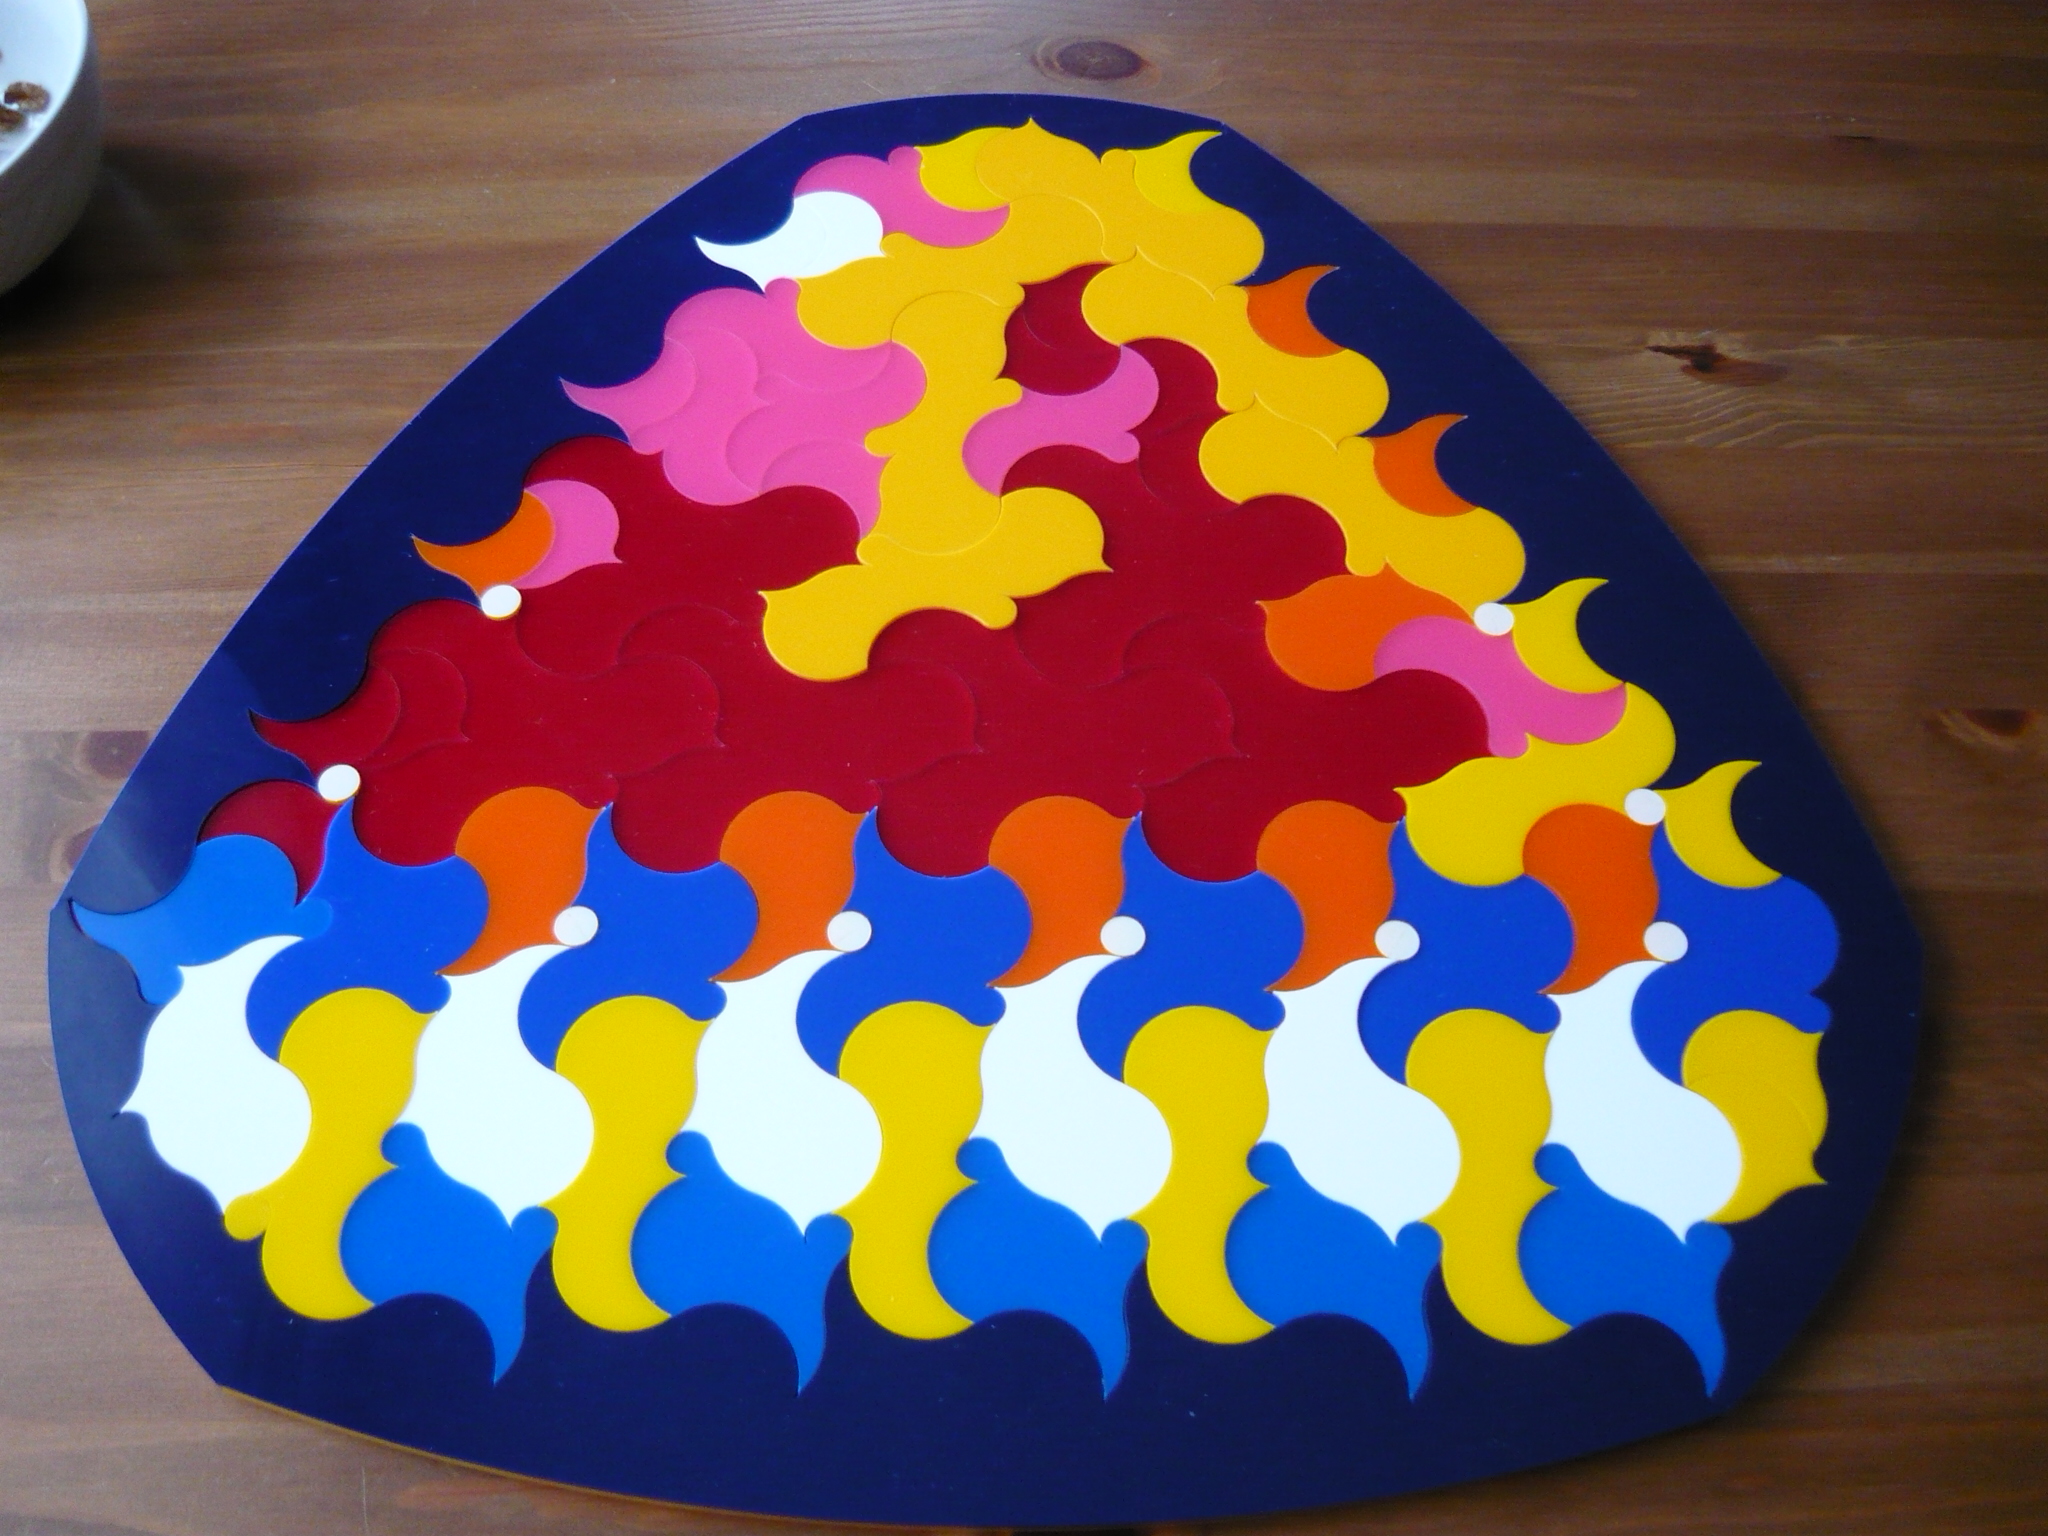 A curvy puzzle made by coloured acryl